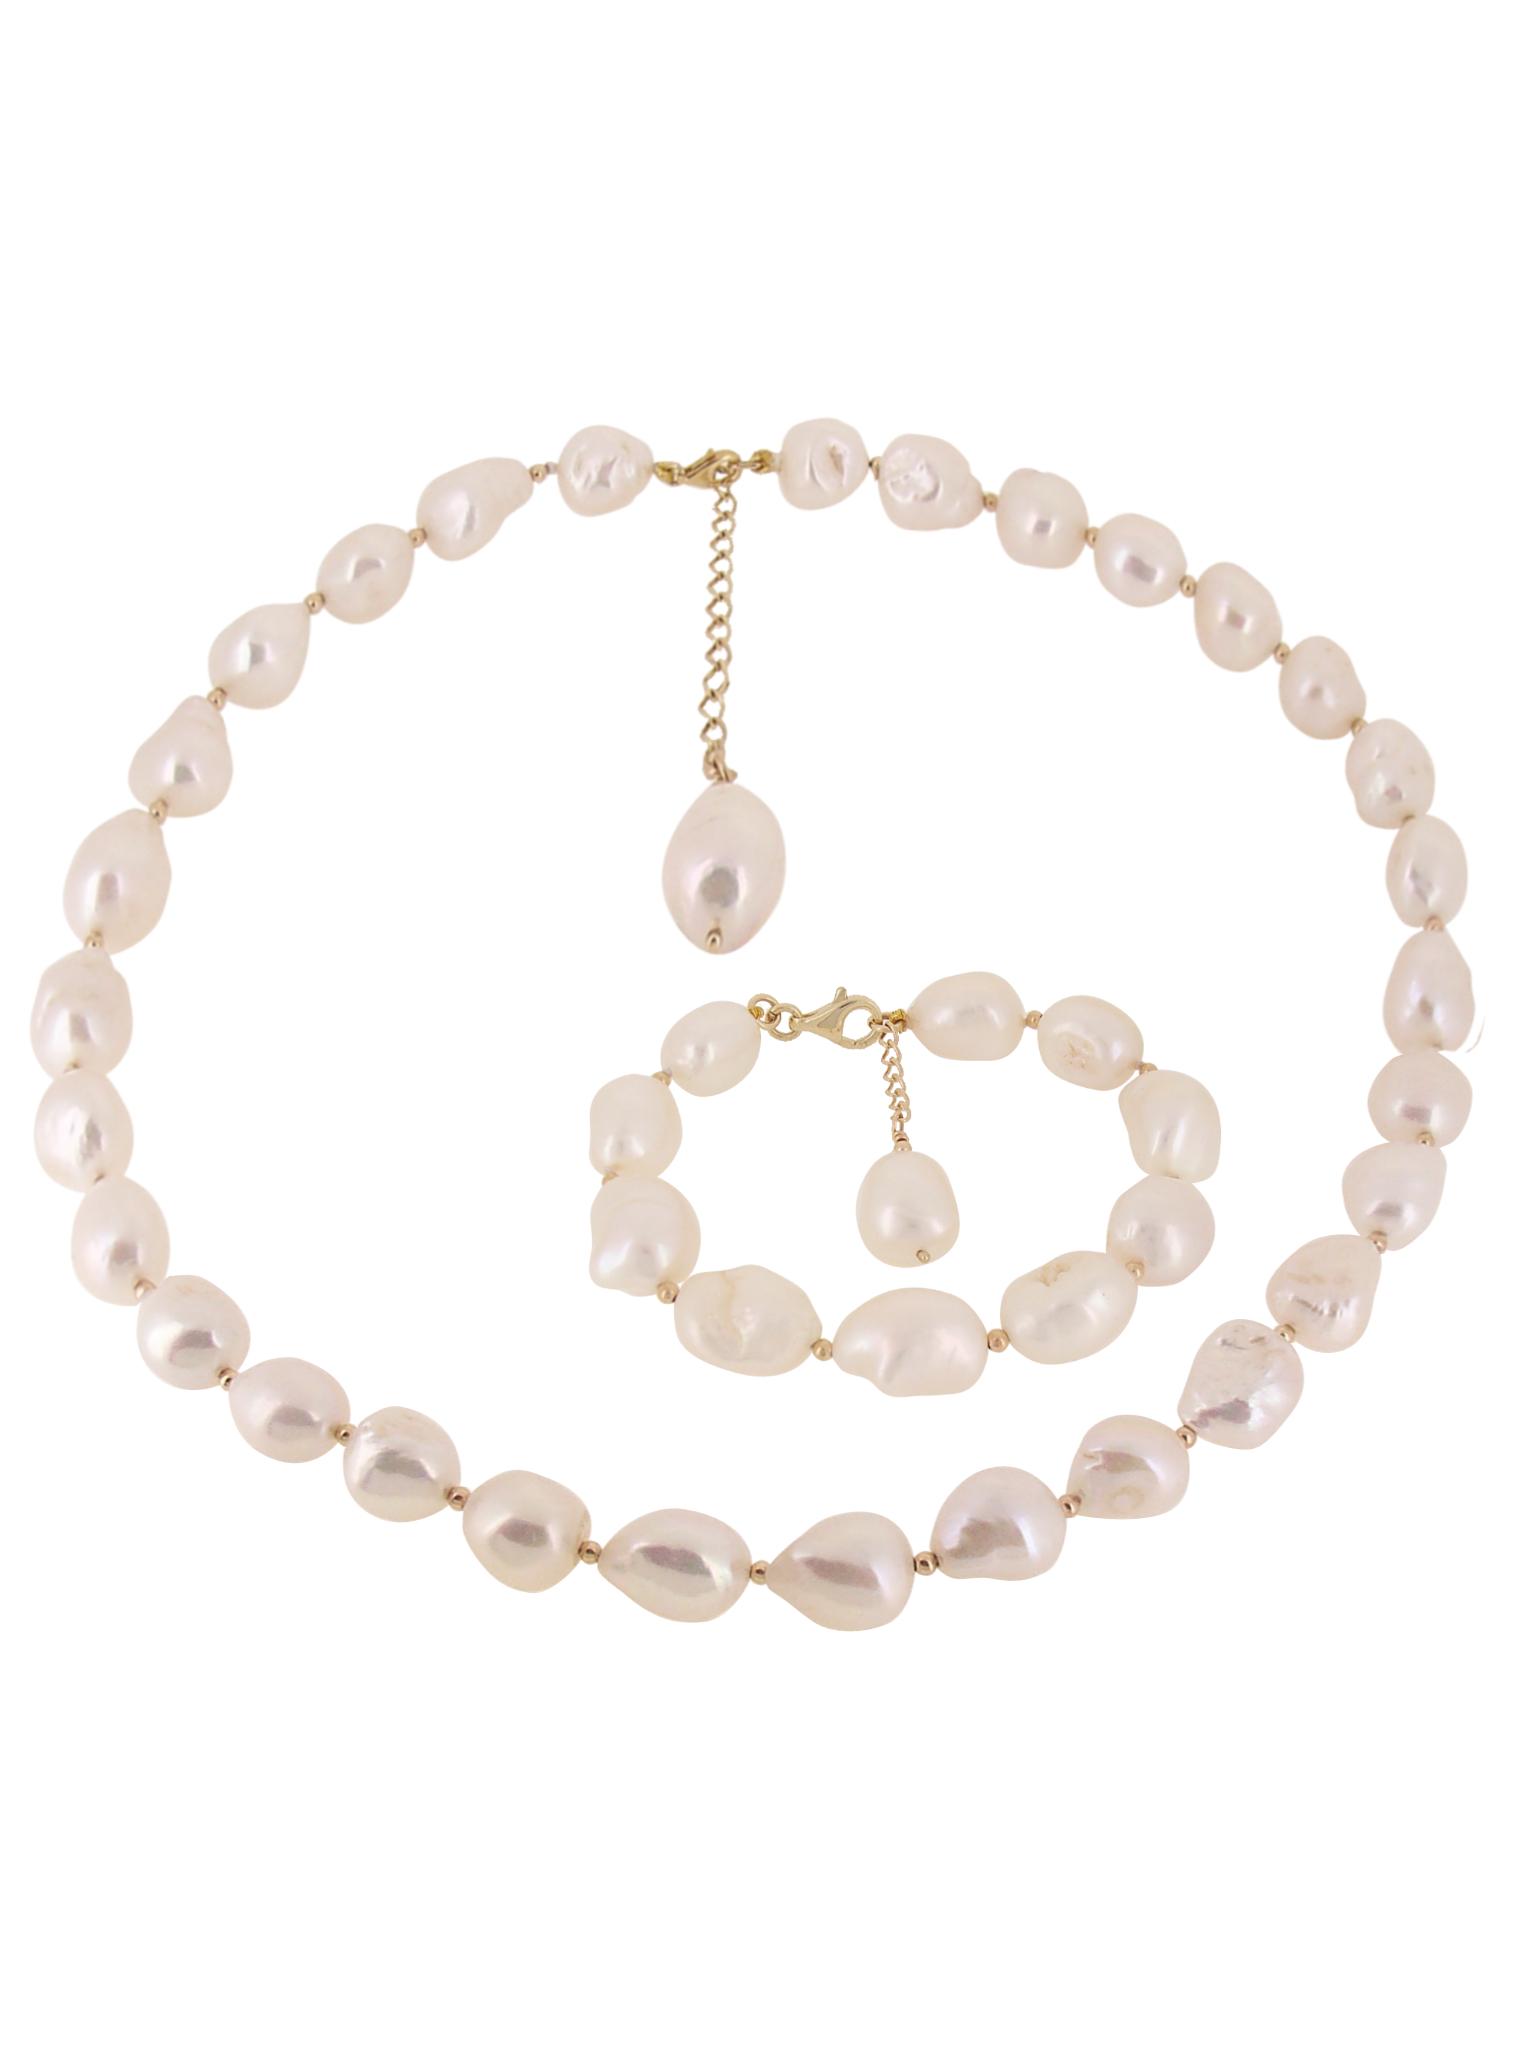 Coco Large Baroque Freshwater Pearl Necklace in 9ct Gold — The